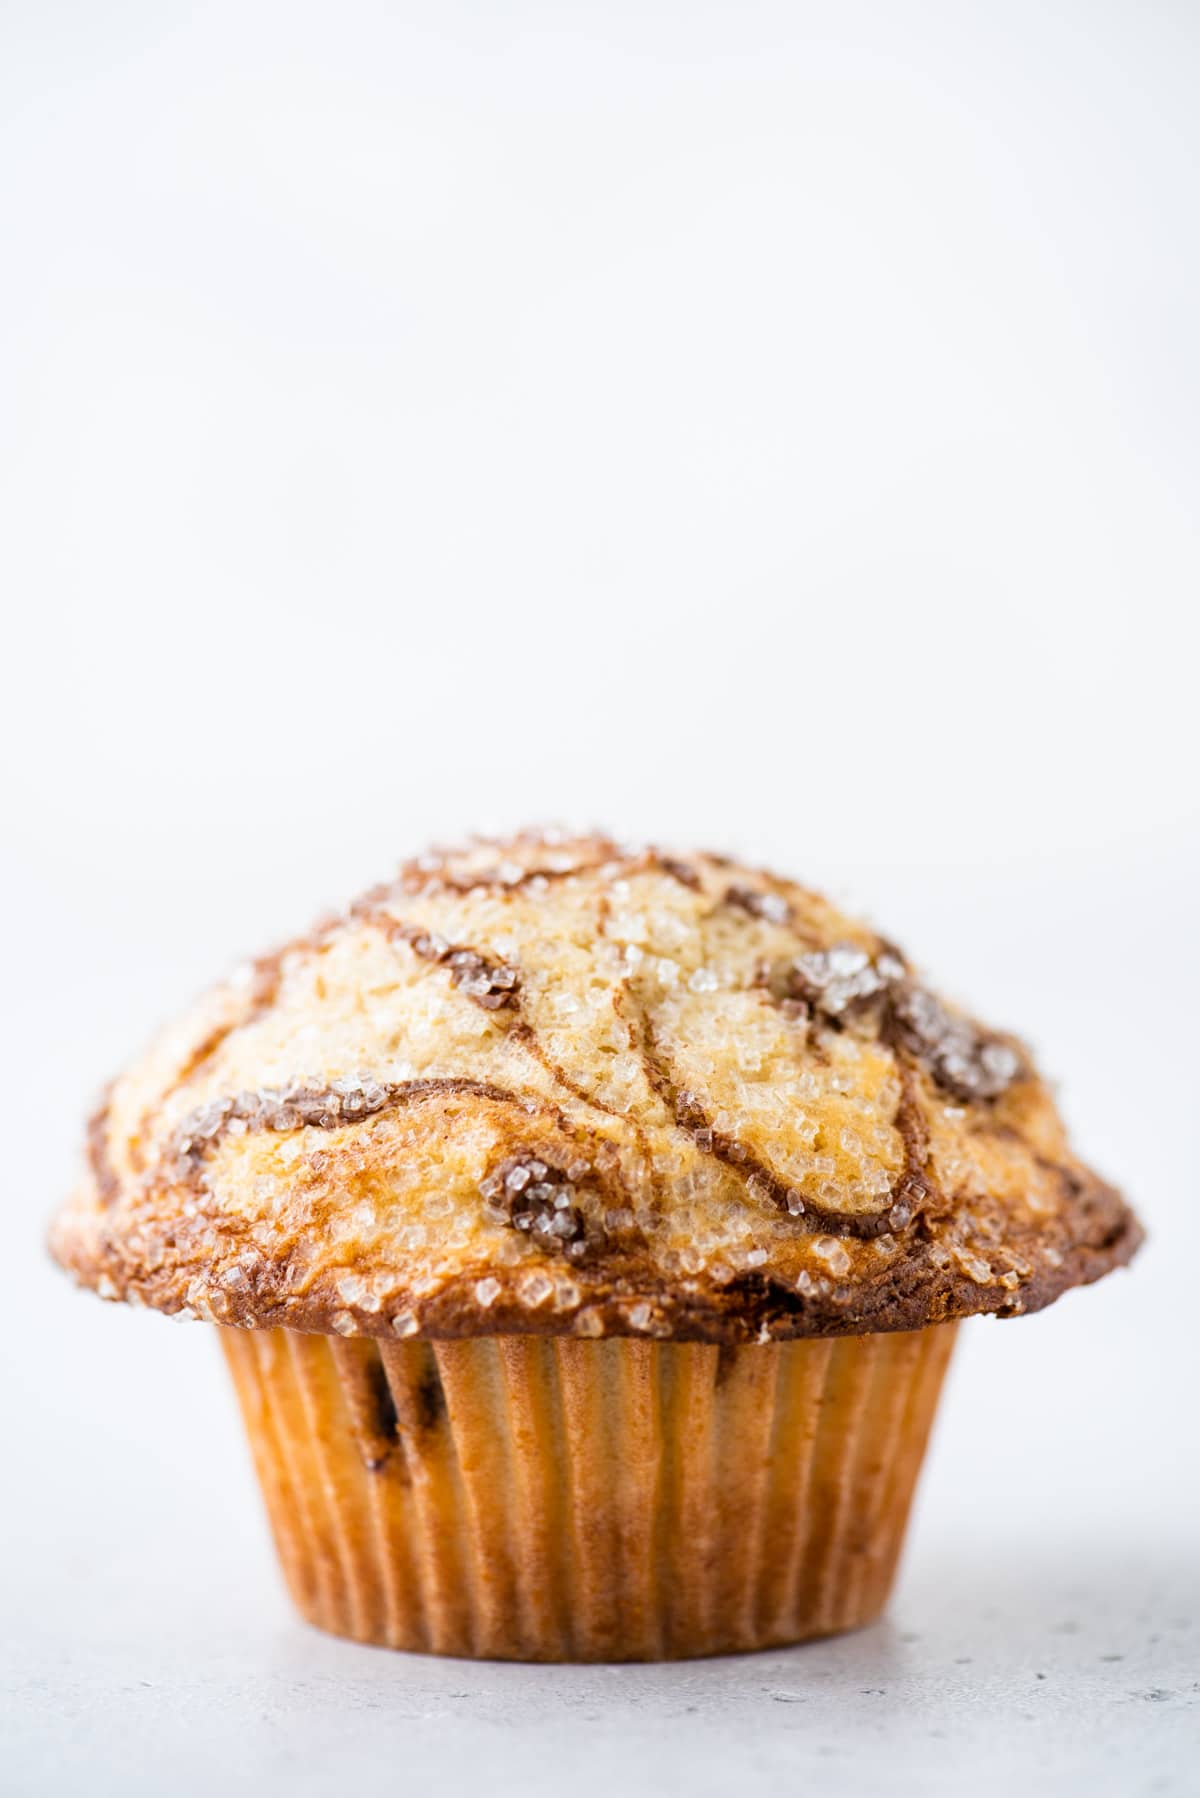 a nutella swirl muffin sitting on a white surface with a white background